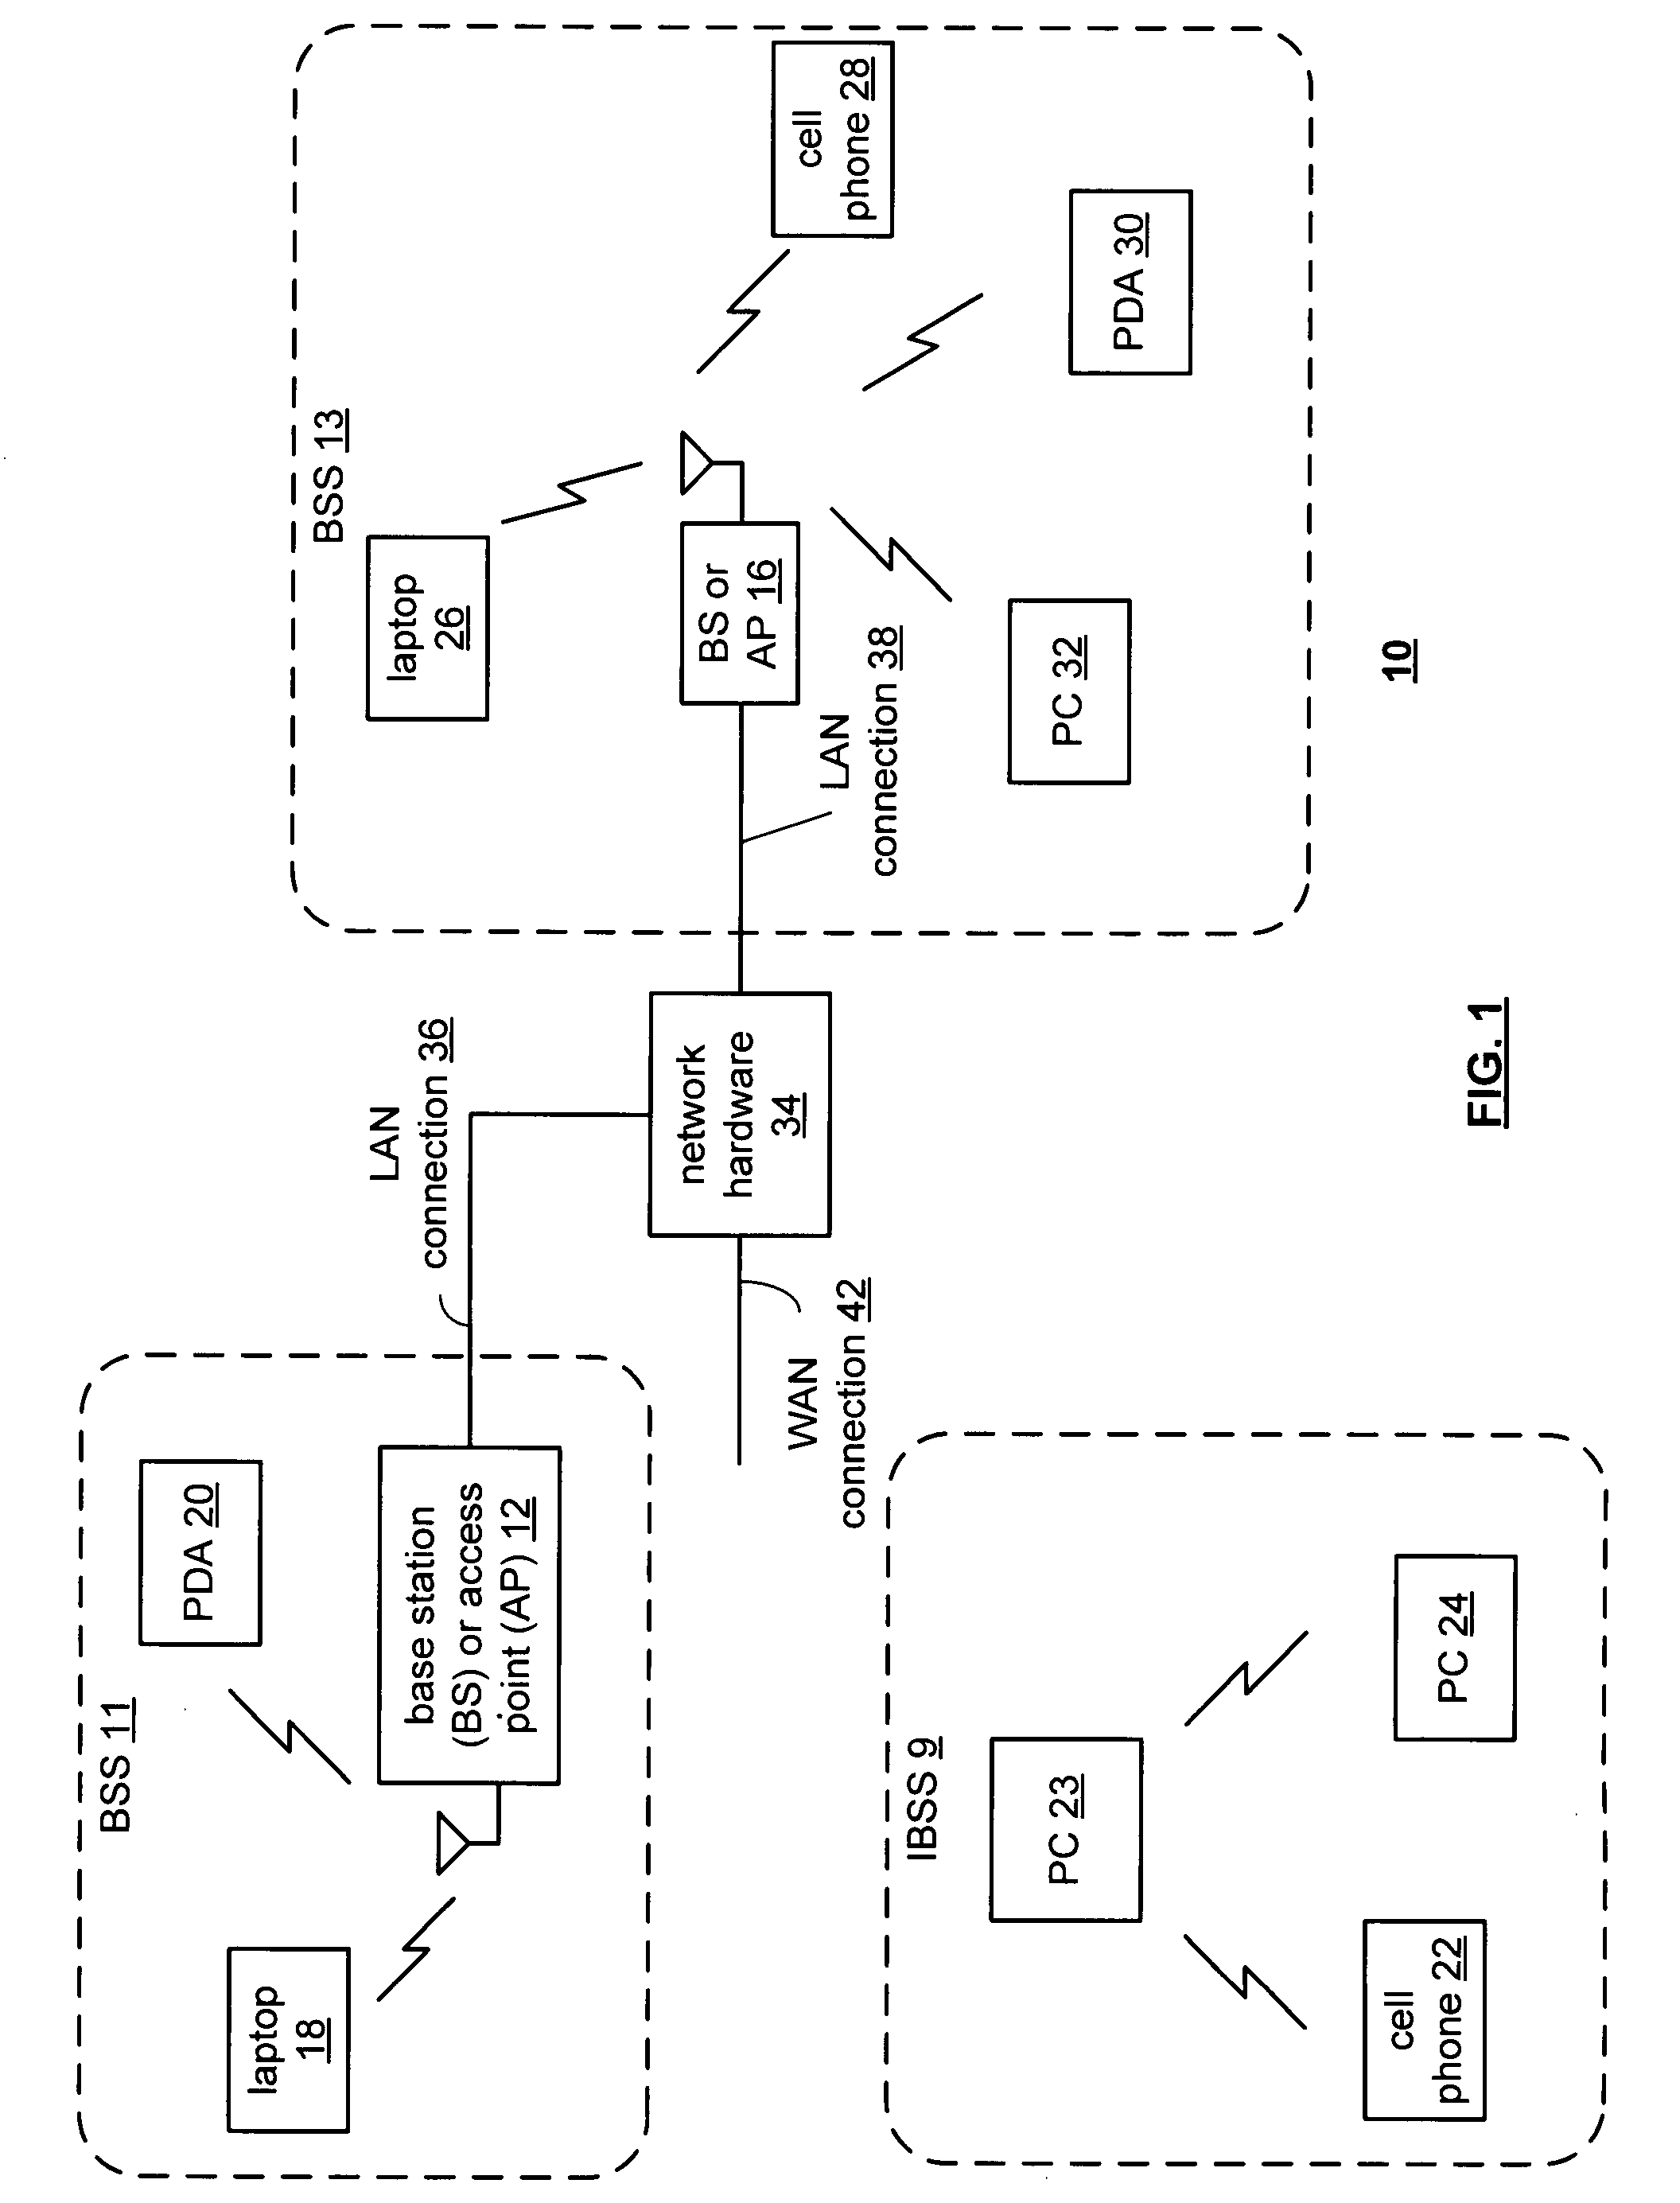 Wireless communication device with programmable antenna system